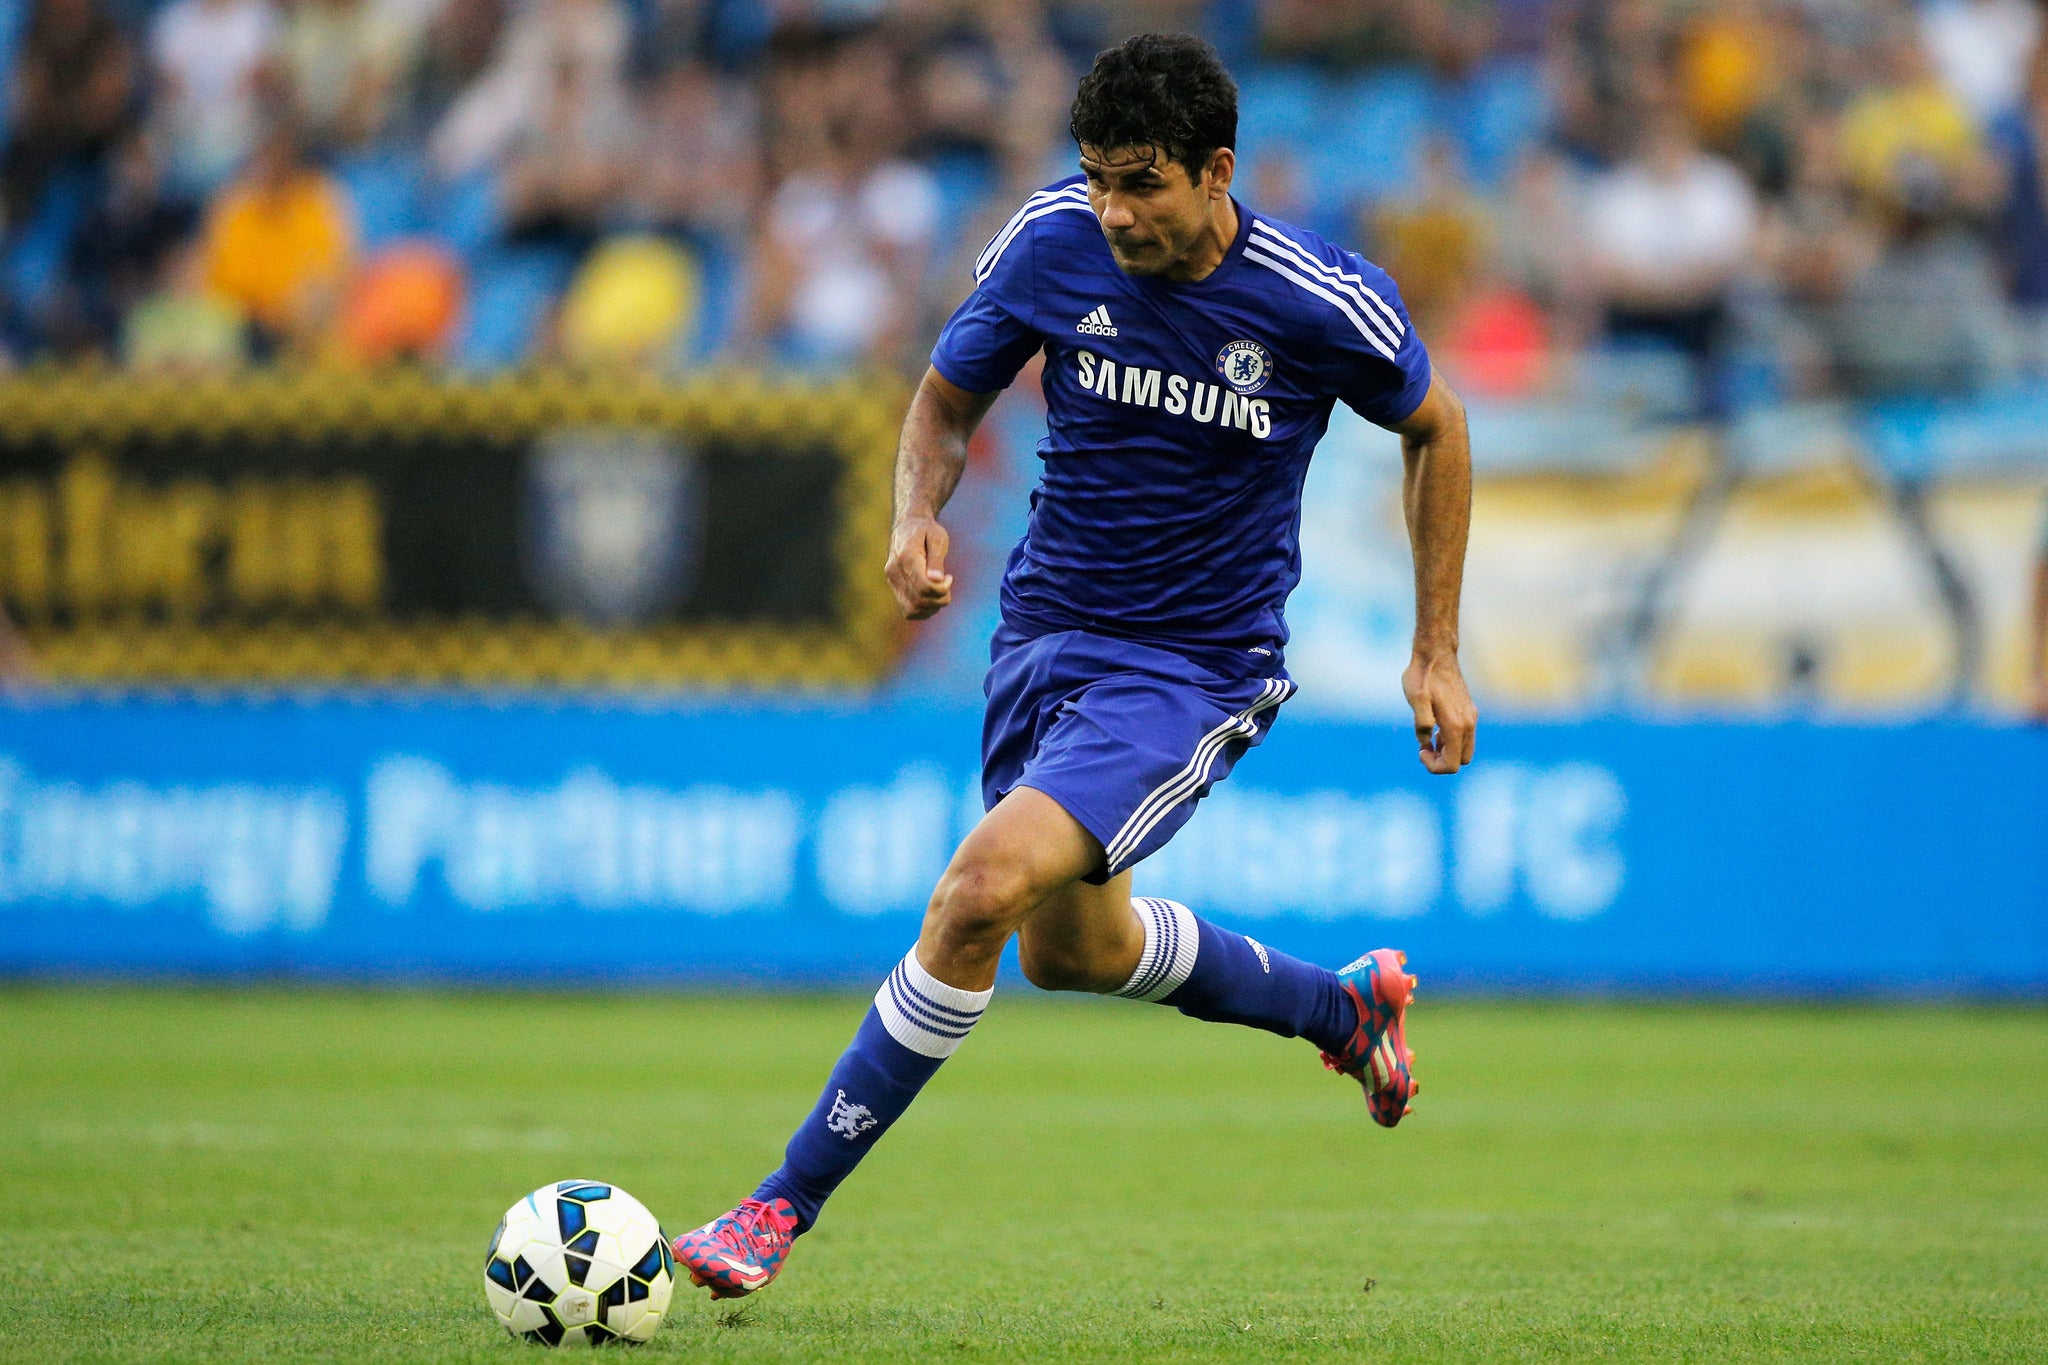 Diego Costa excelled for Chelsea yet again